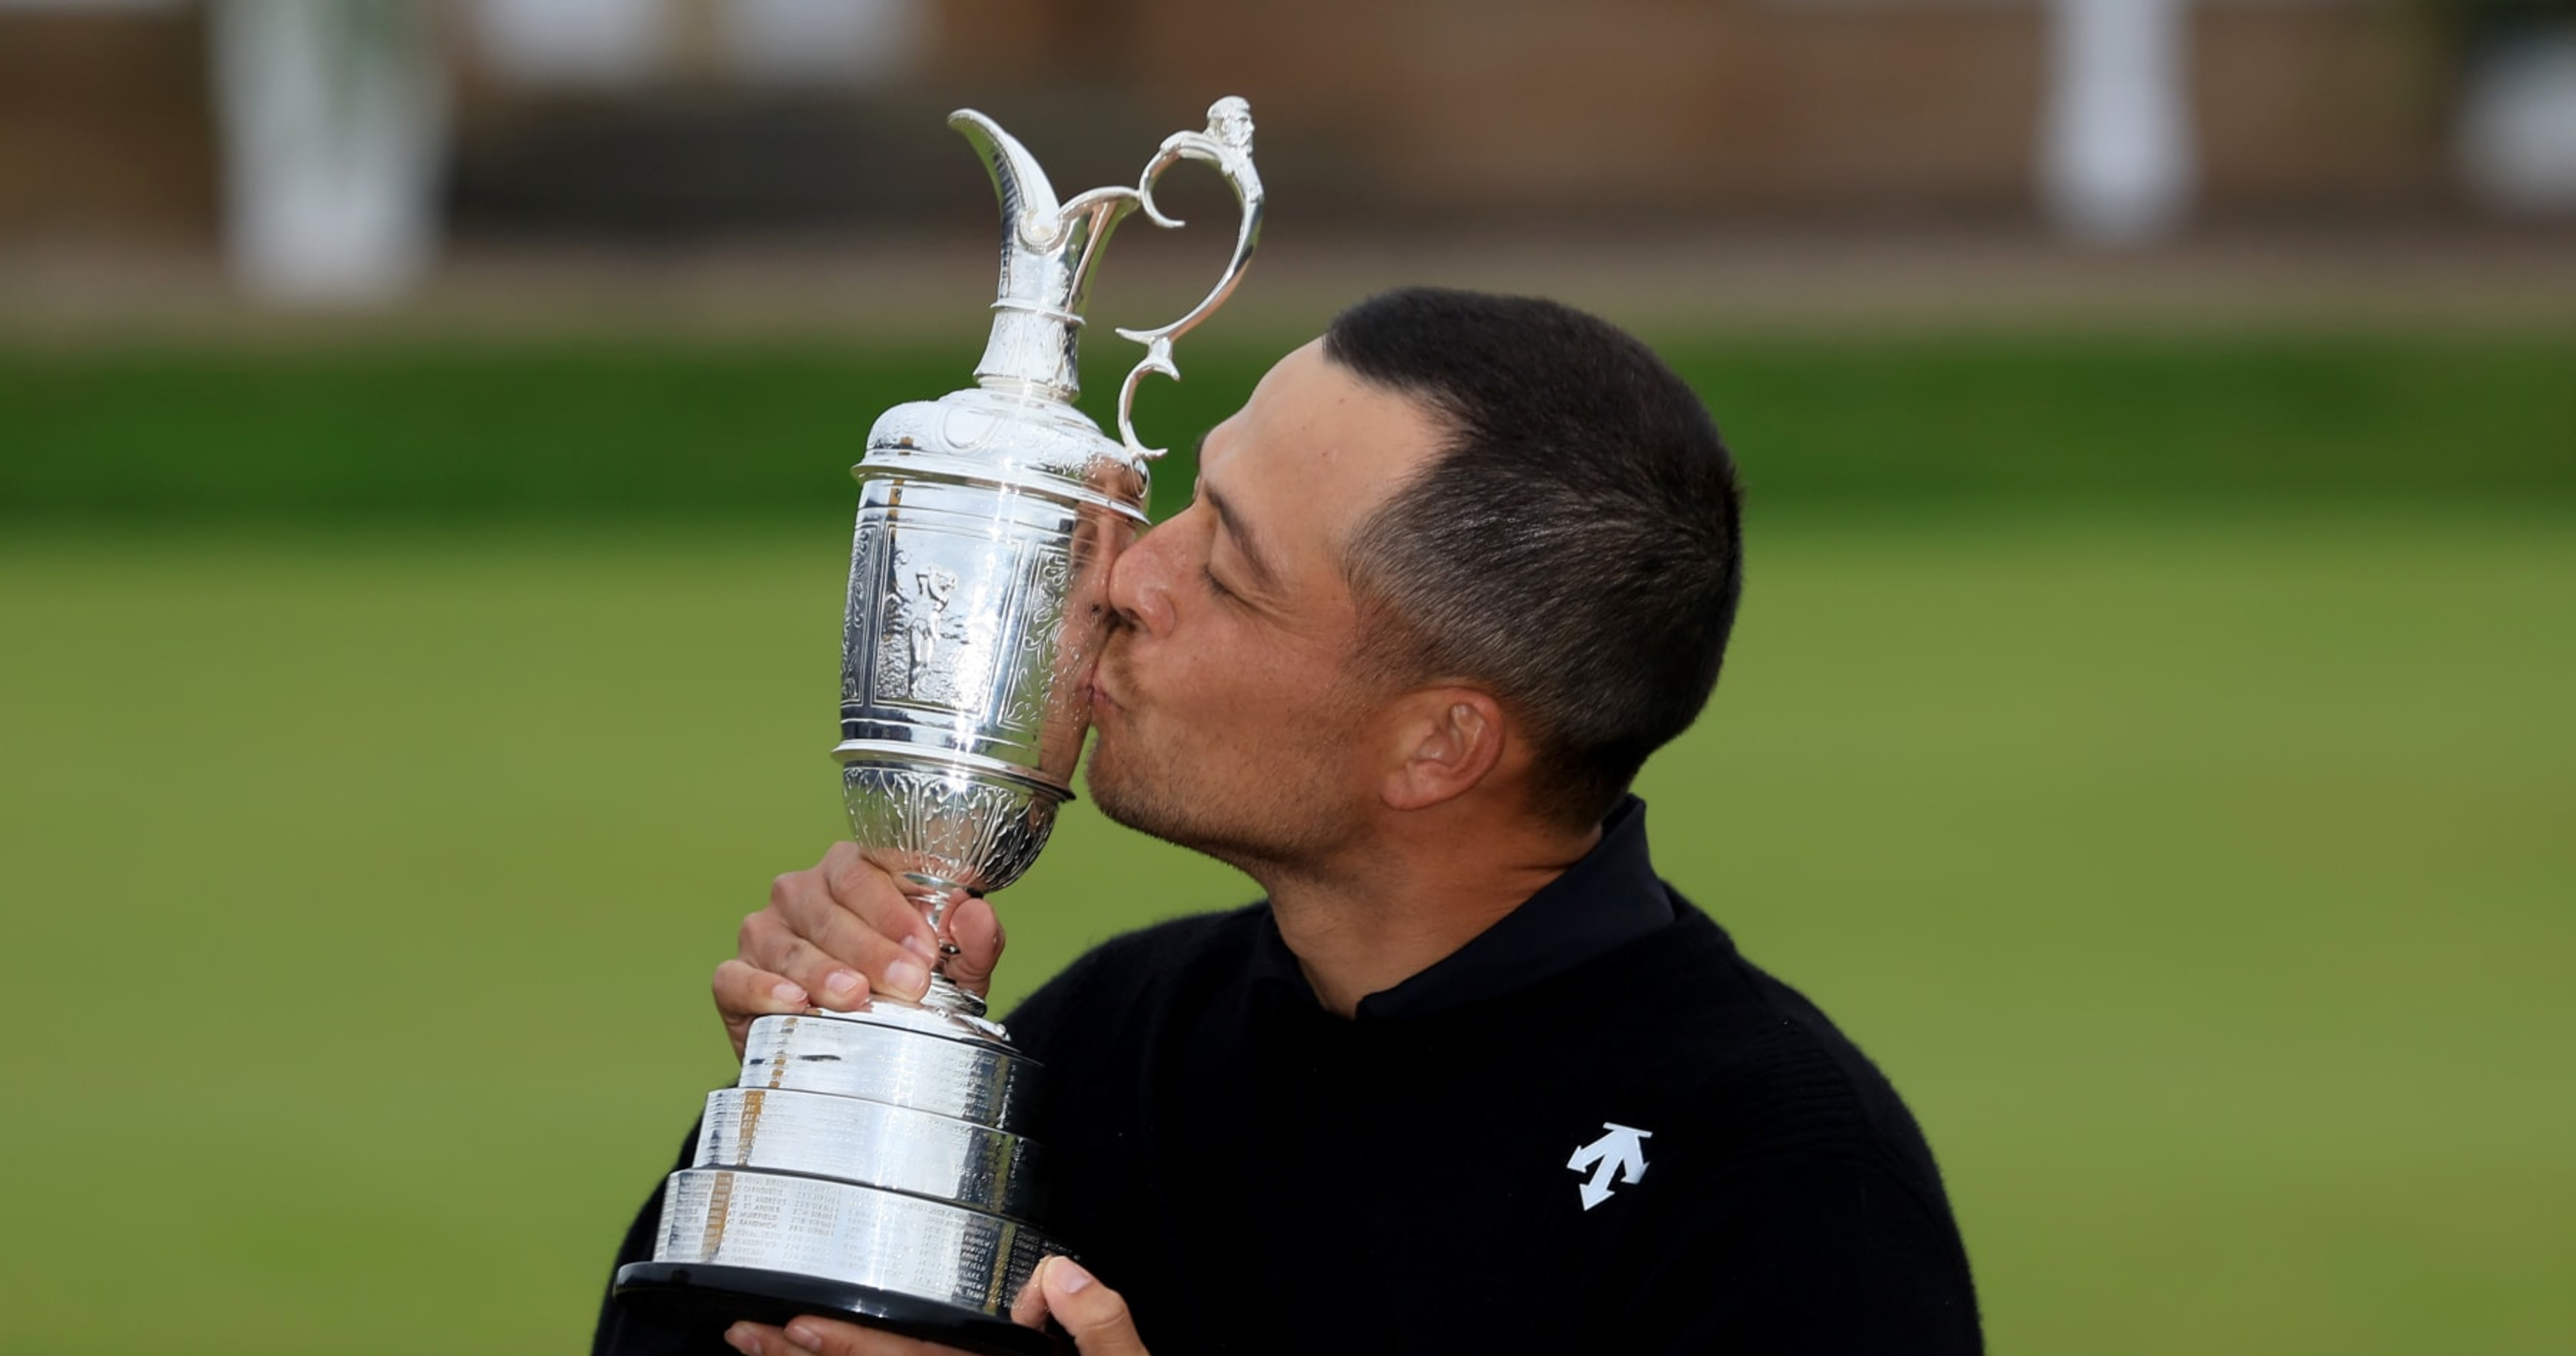 Xander Schauffele Jokes He 'Can't Wait to Drink out of' Claret Jug After British Open